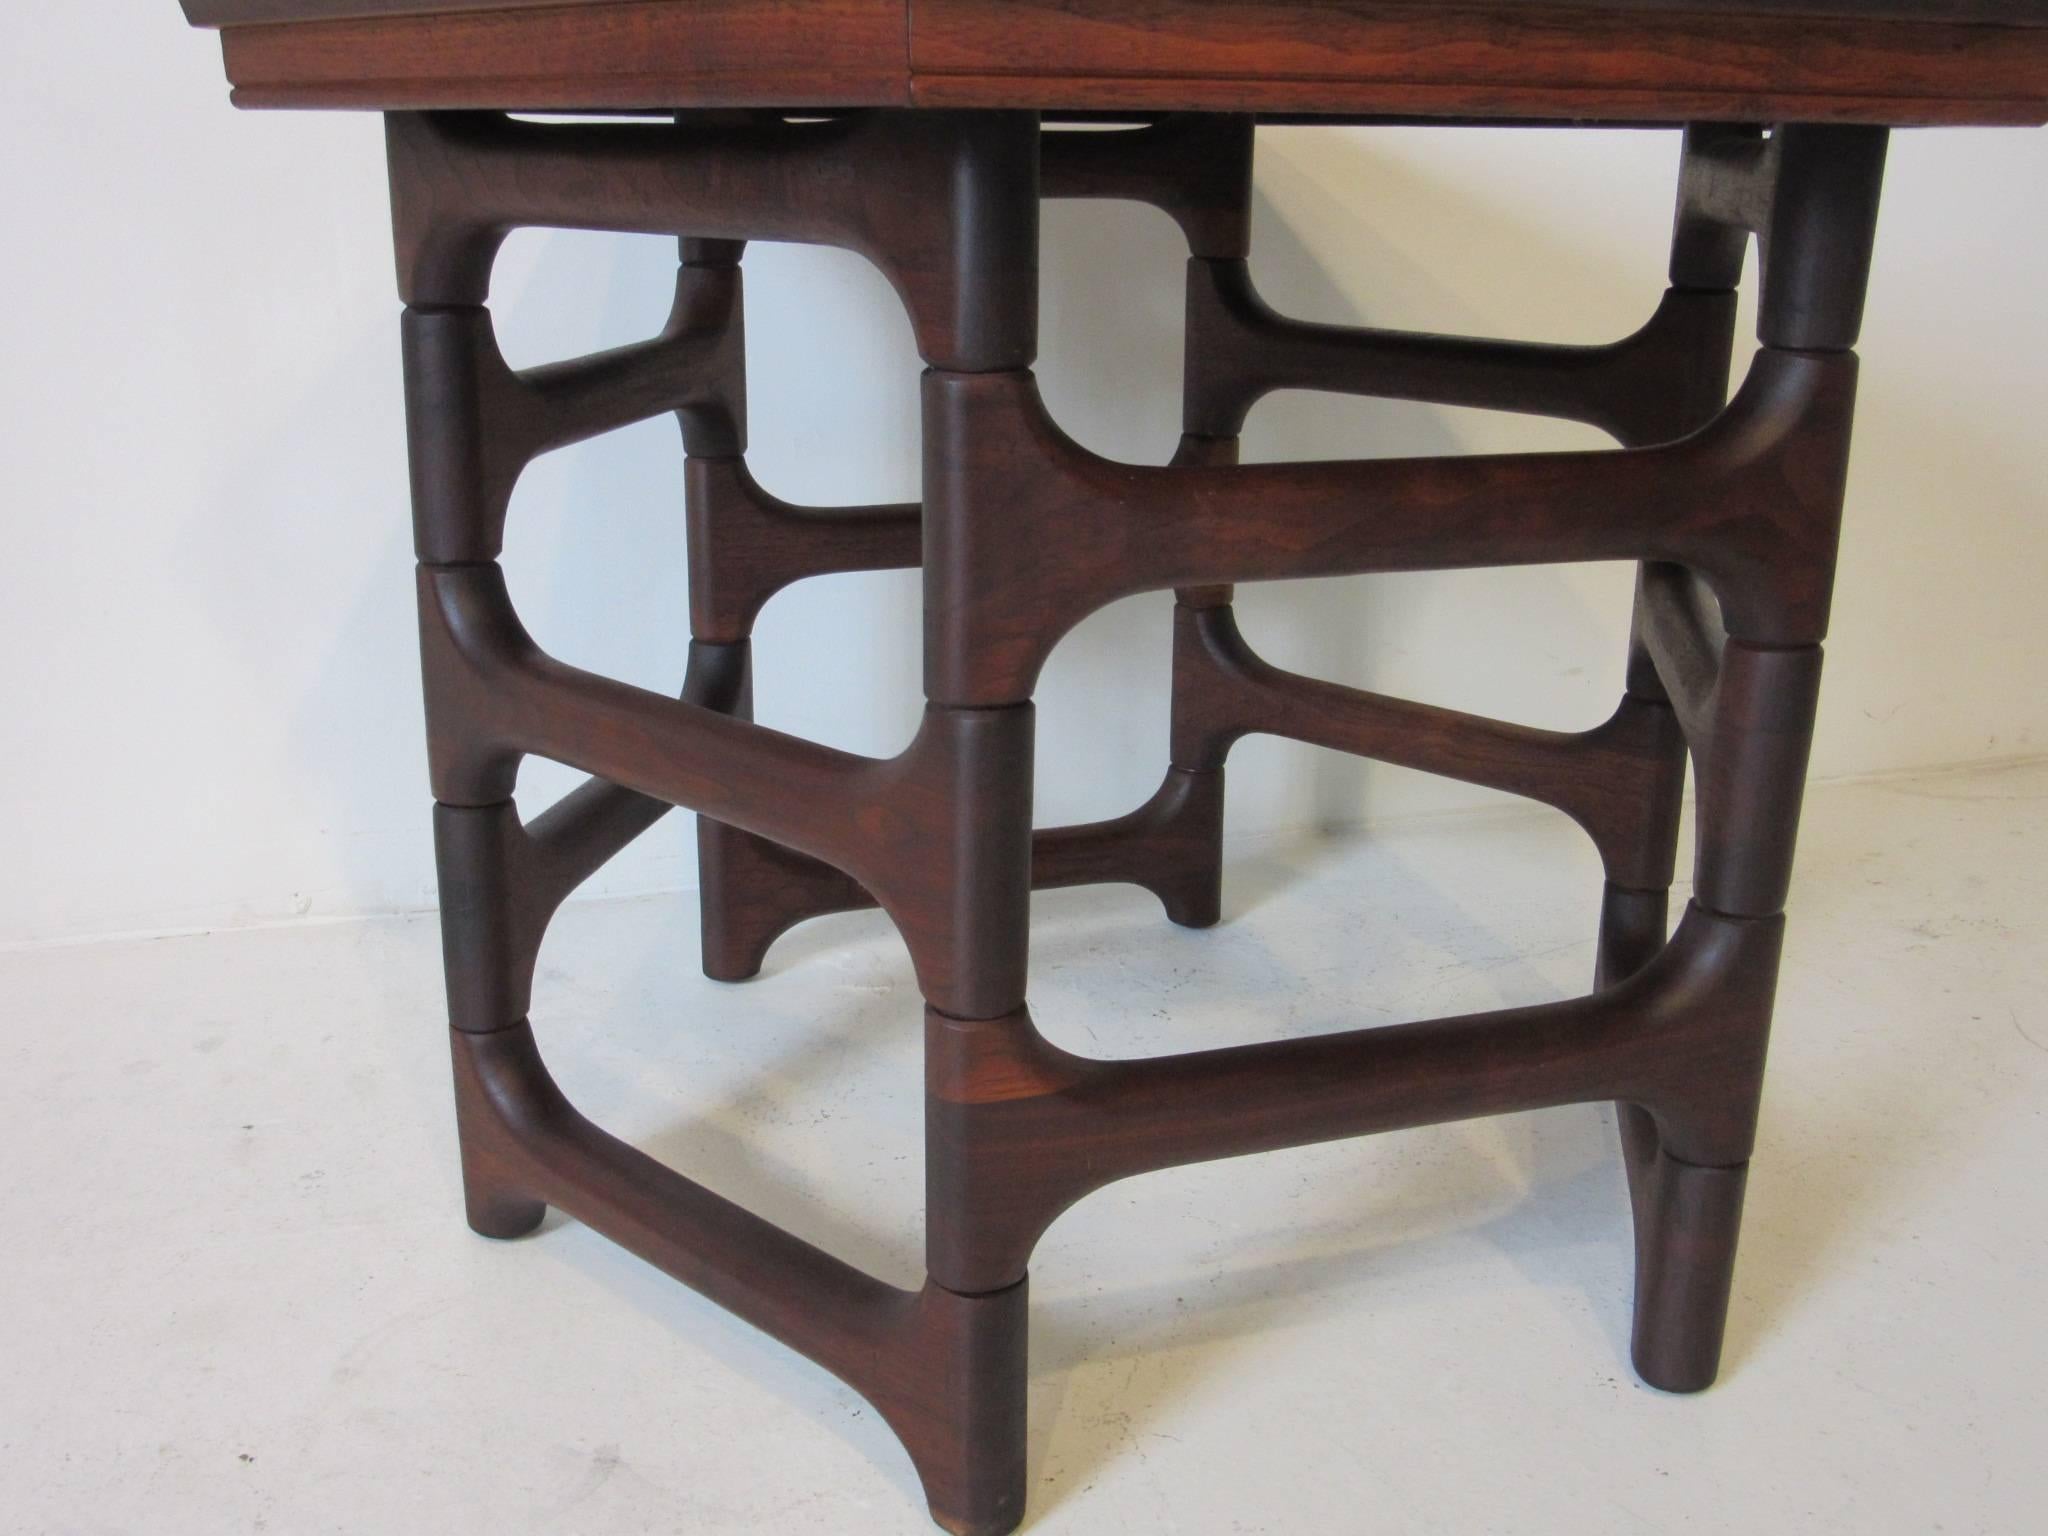 A wonderfully designed dark walnut side table with hexagon inlay wood top and sculpted wooden base in the style of the modern studio artists Michael Coffey, Angel Pazmino and Phillip Lloyd Powell.